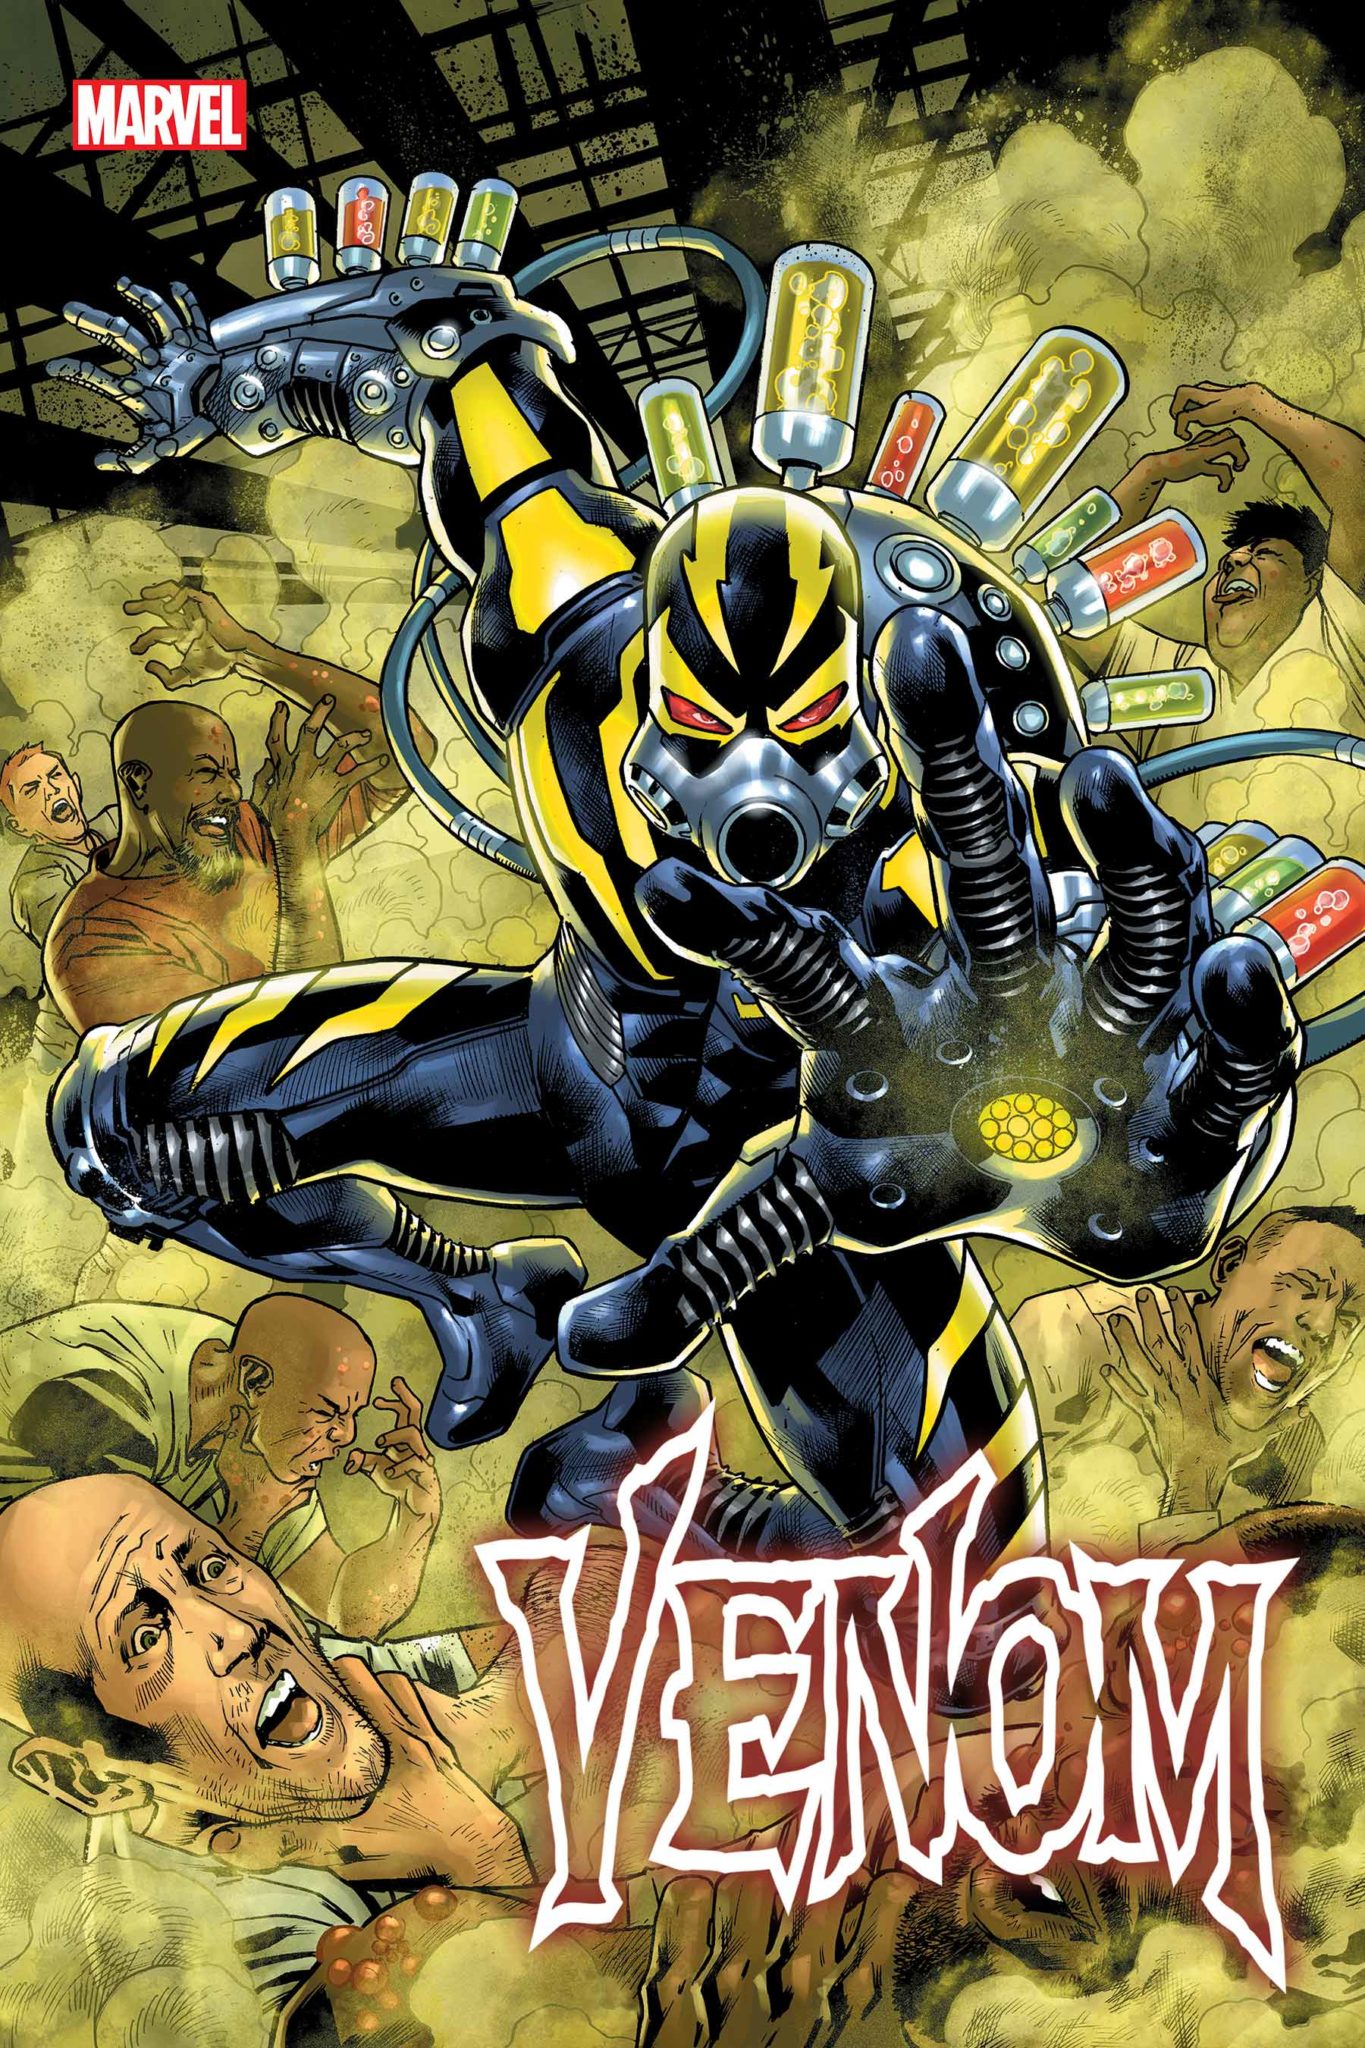 Venom #11 cover showing Sleeper Agent and his many choking victime